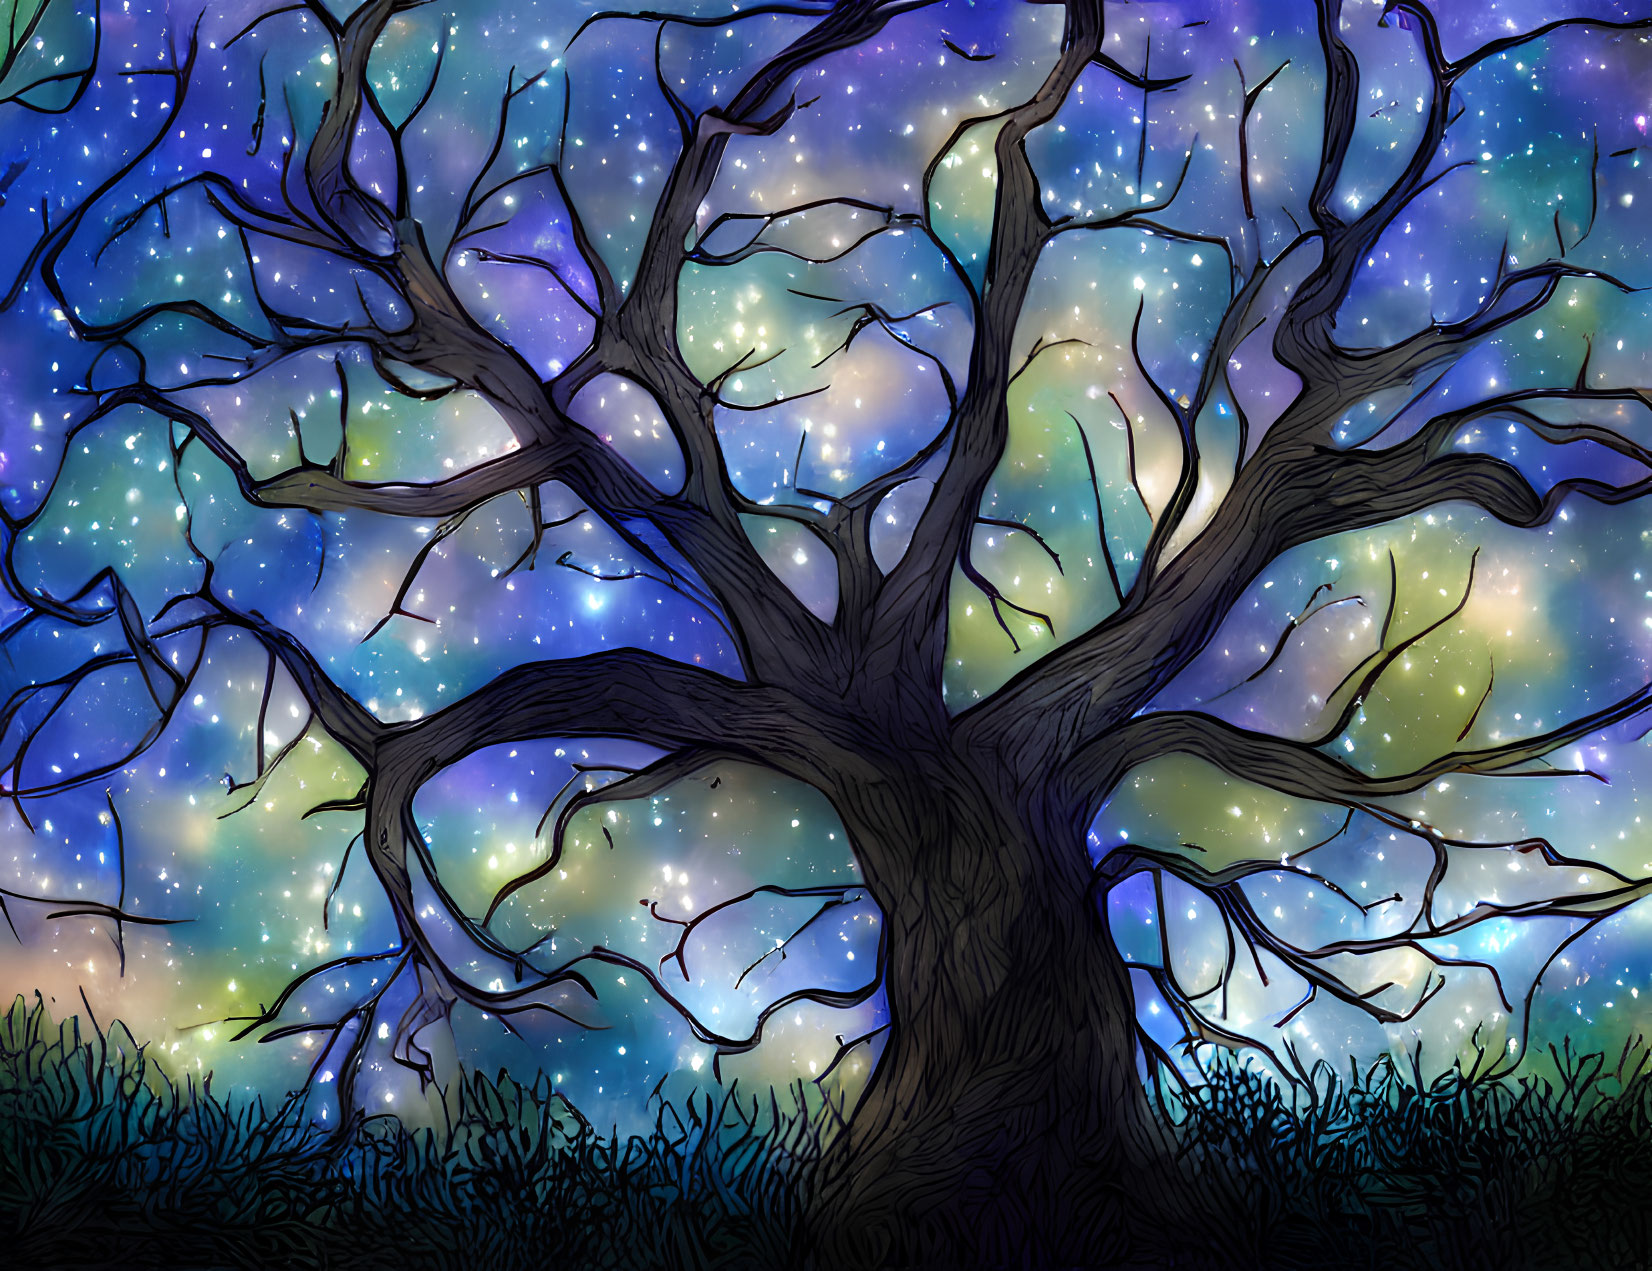 Mystical tree silhouette against starry night sky